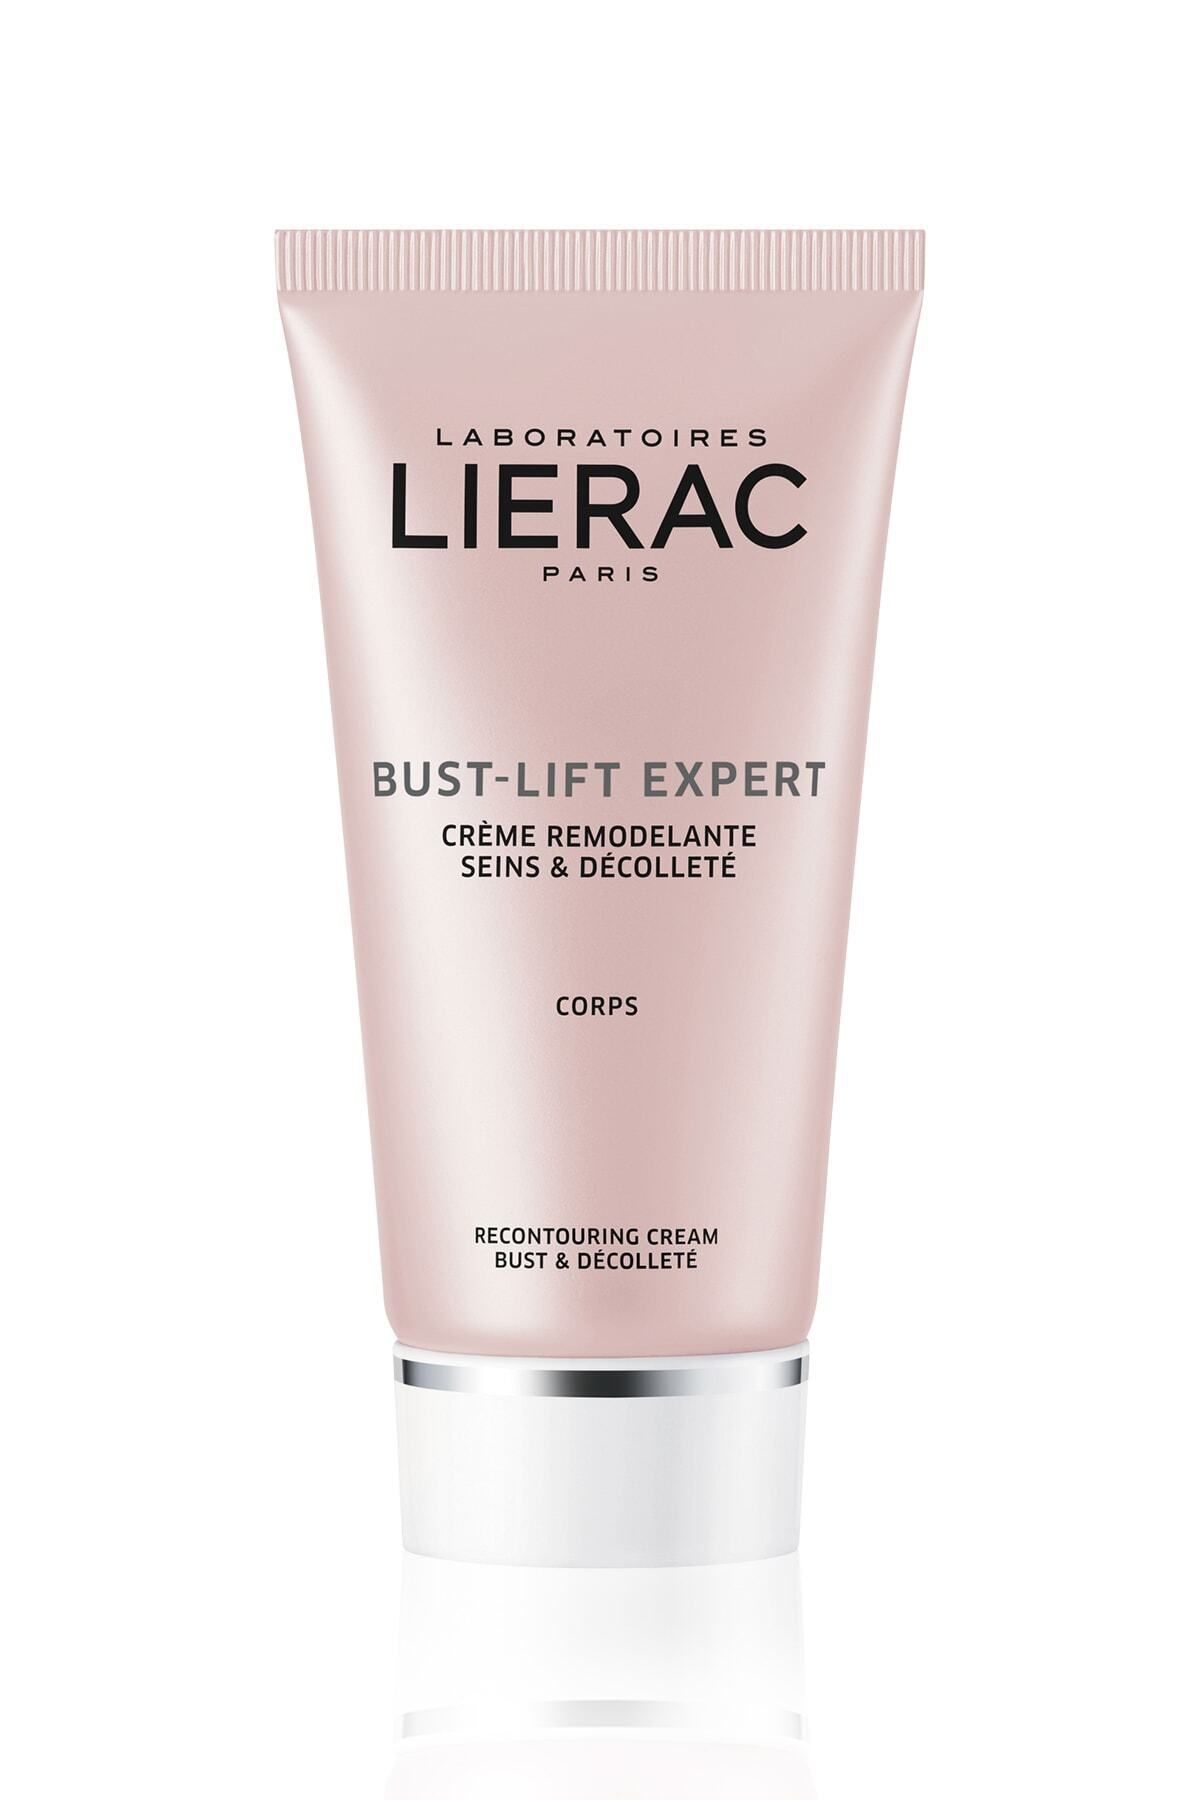 Lierac RESHAPİNG BUST-LİFT EXPERT CARE CREAM FOR BREAST AND DÉCOLLETÉ AREA 75 ML. DEMBA2935